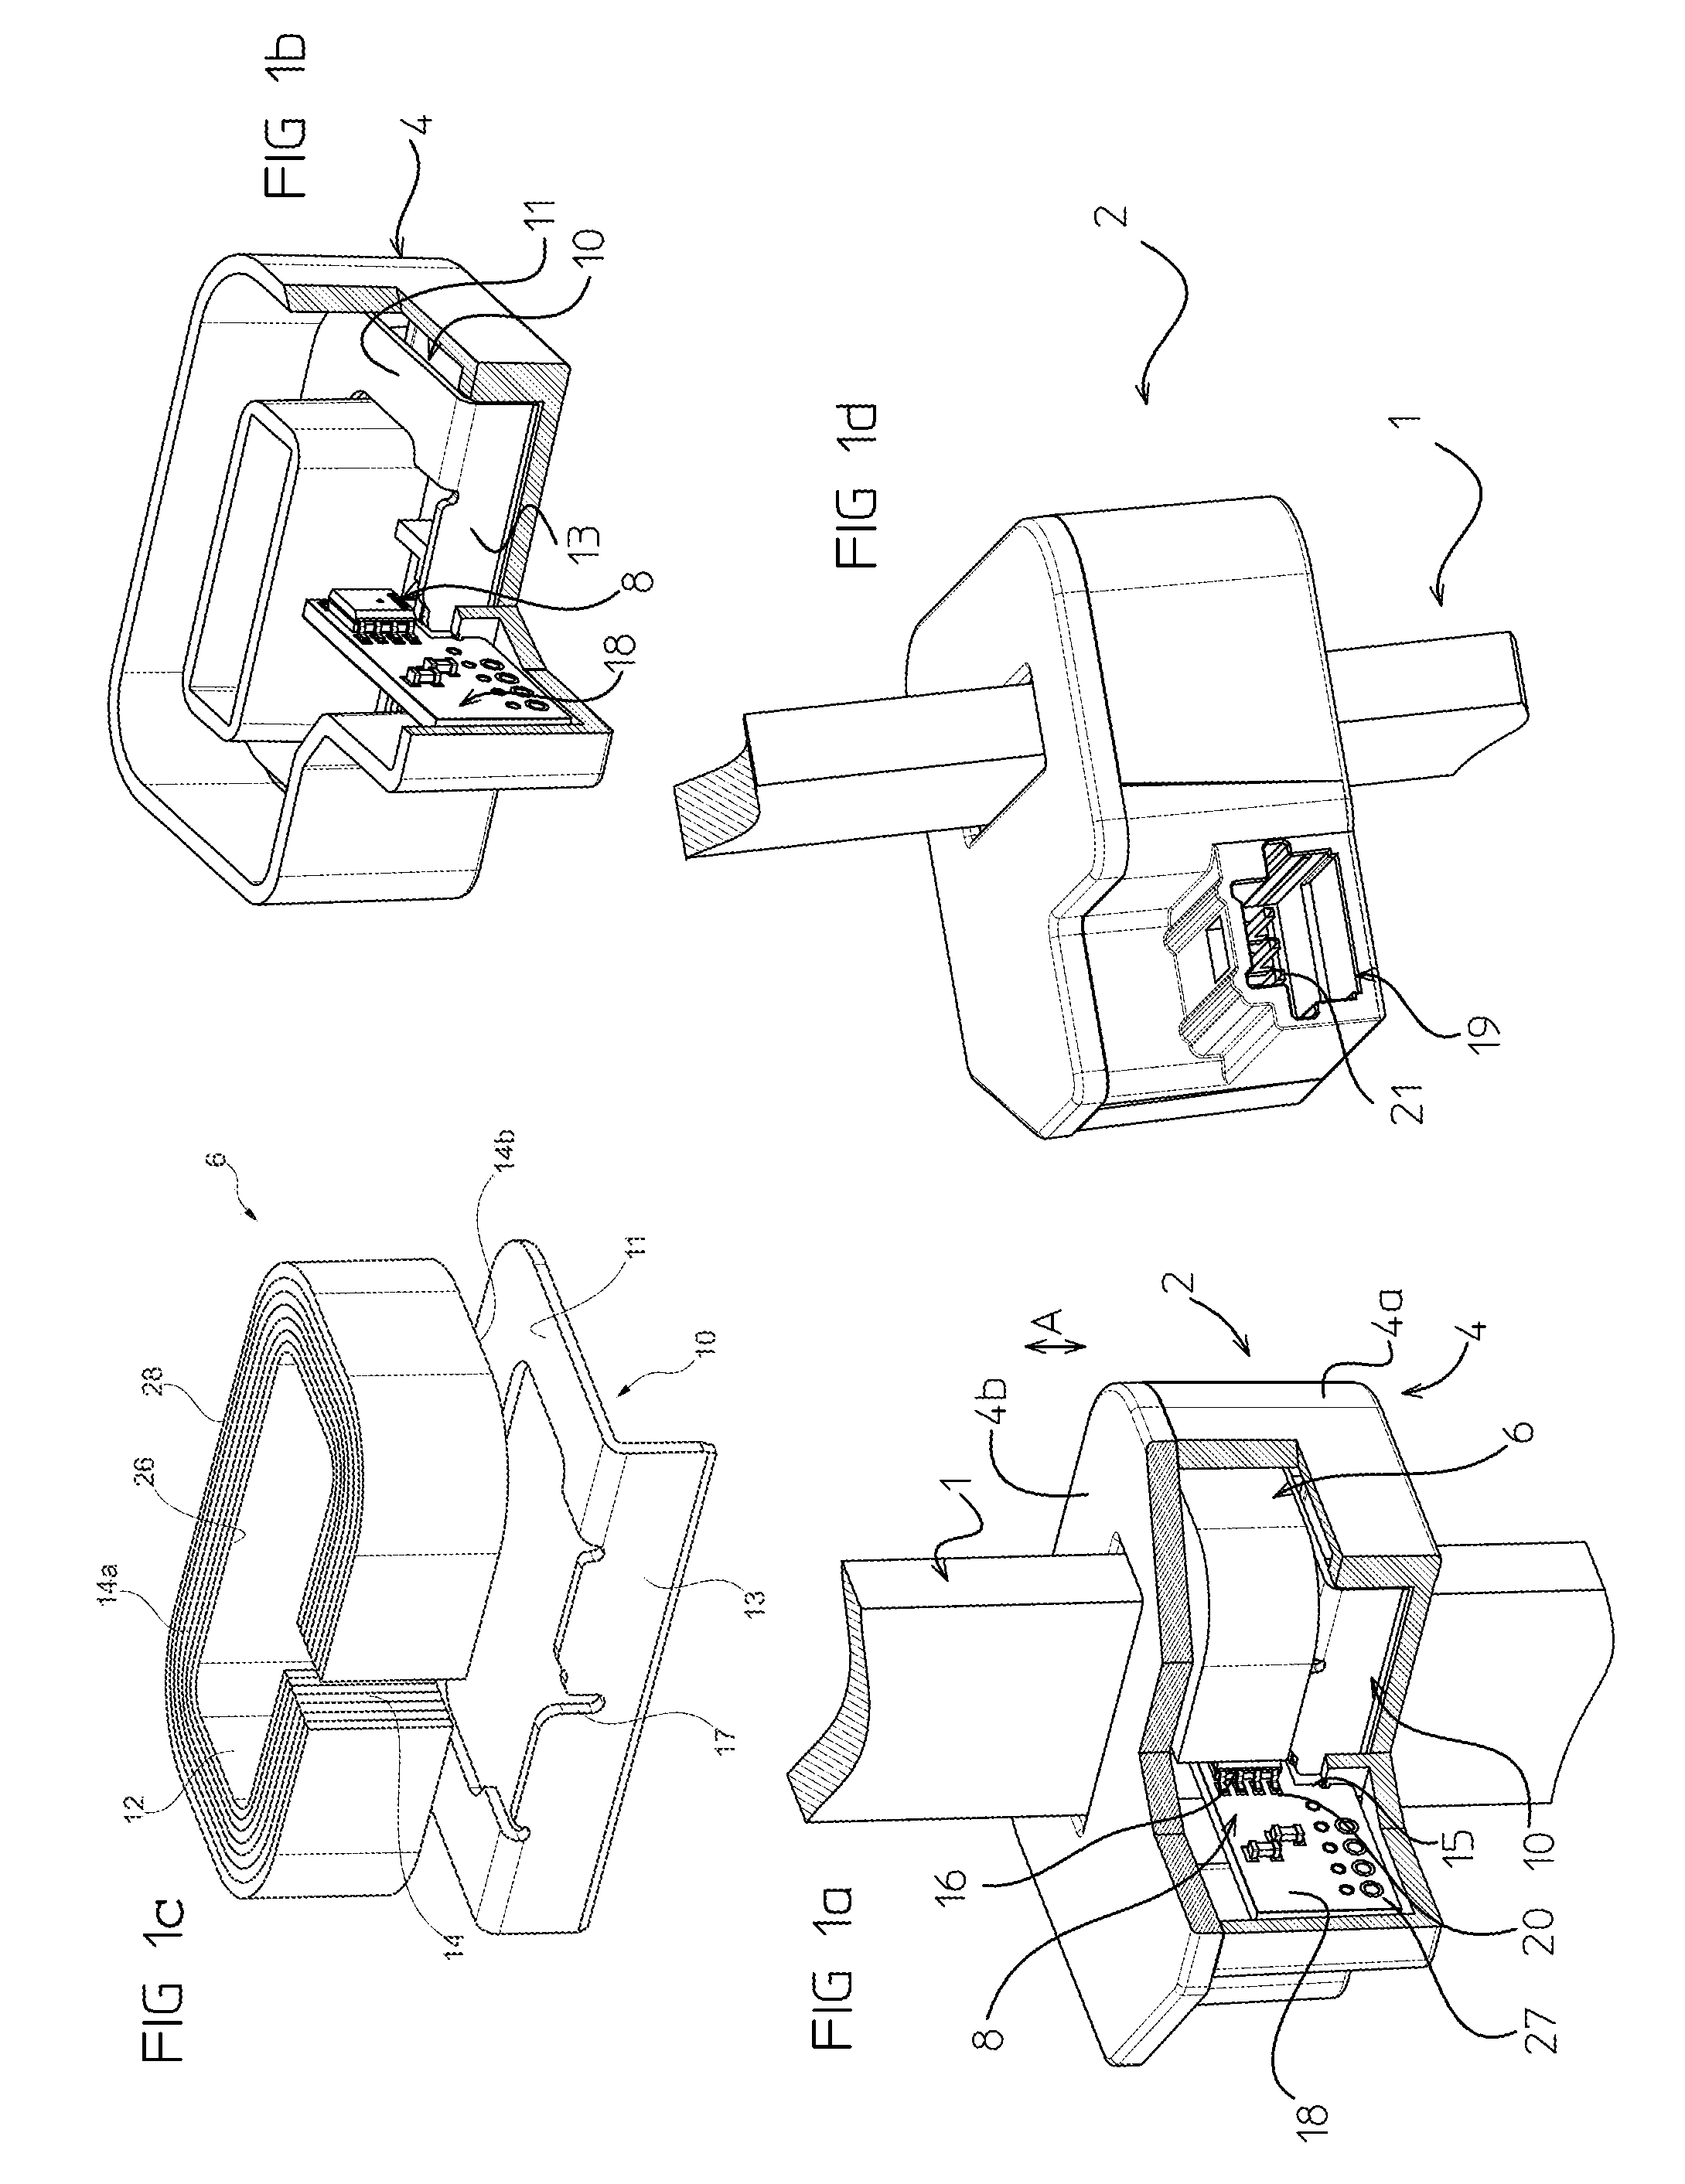 Electrical current sensor with grounded magnetic core